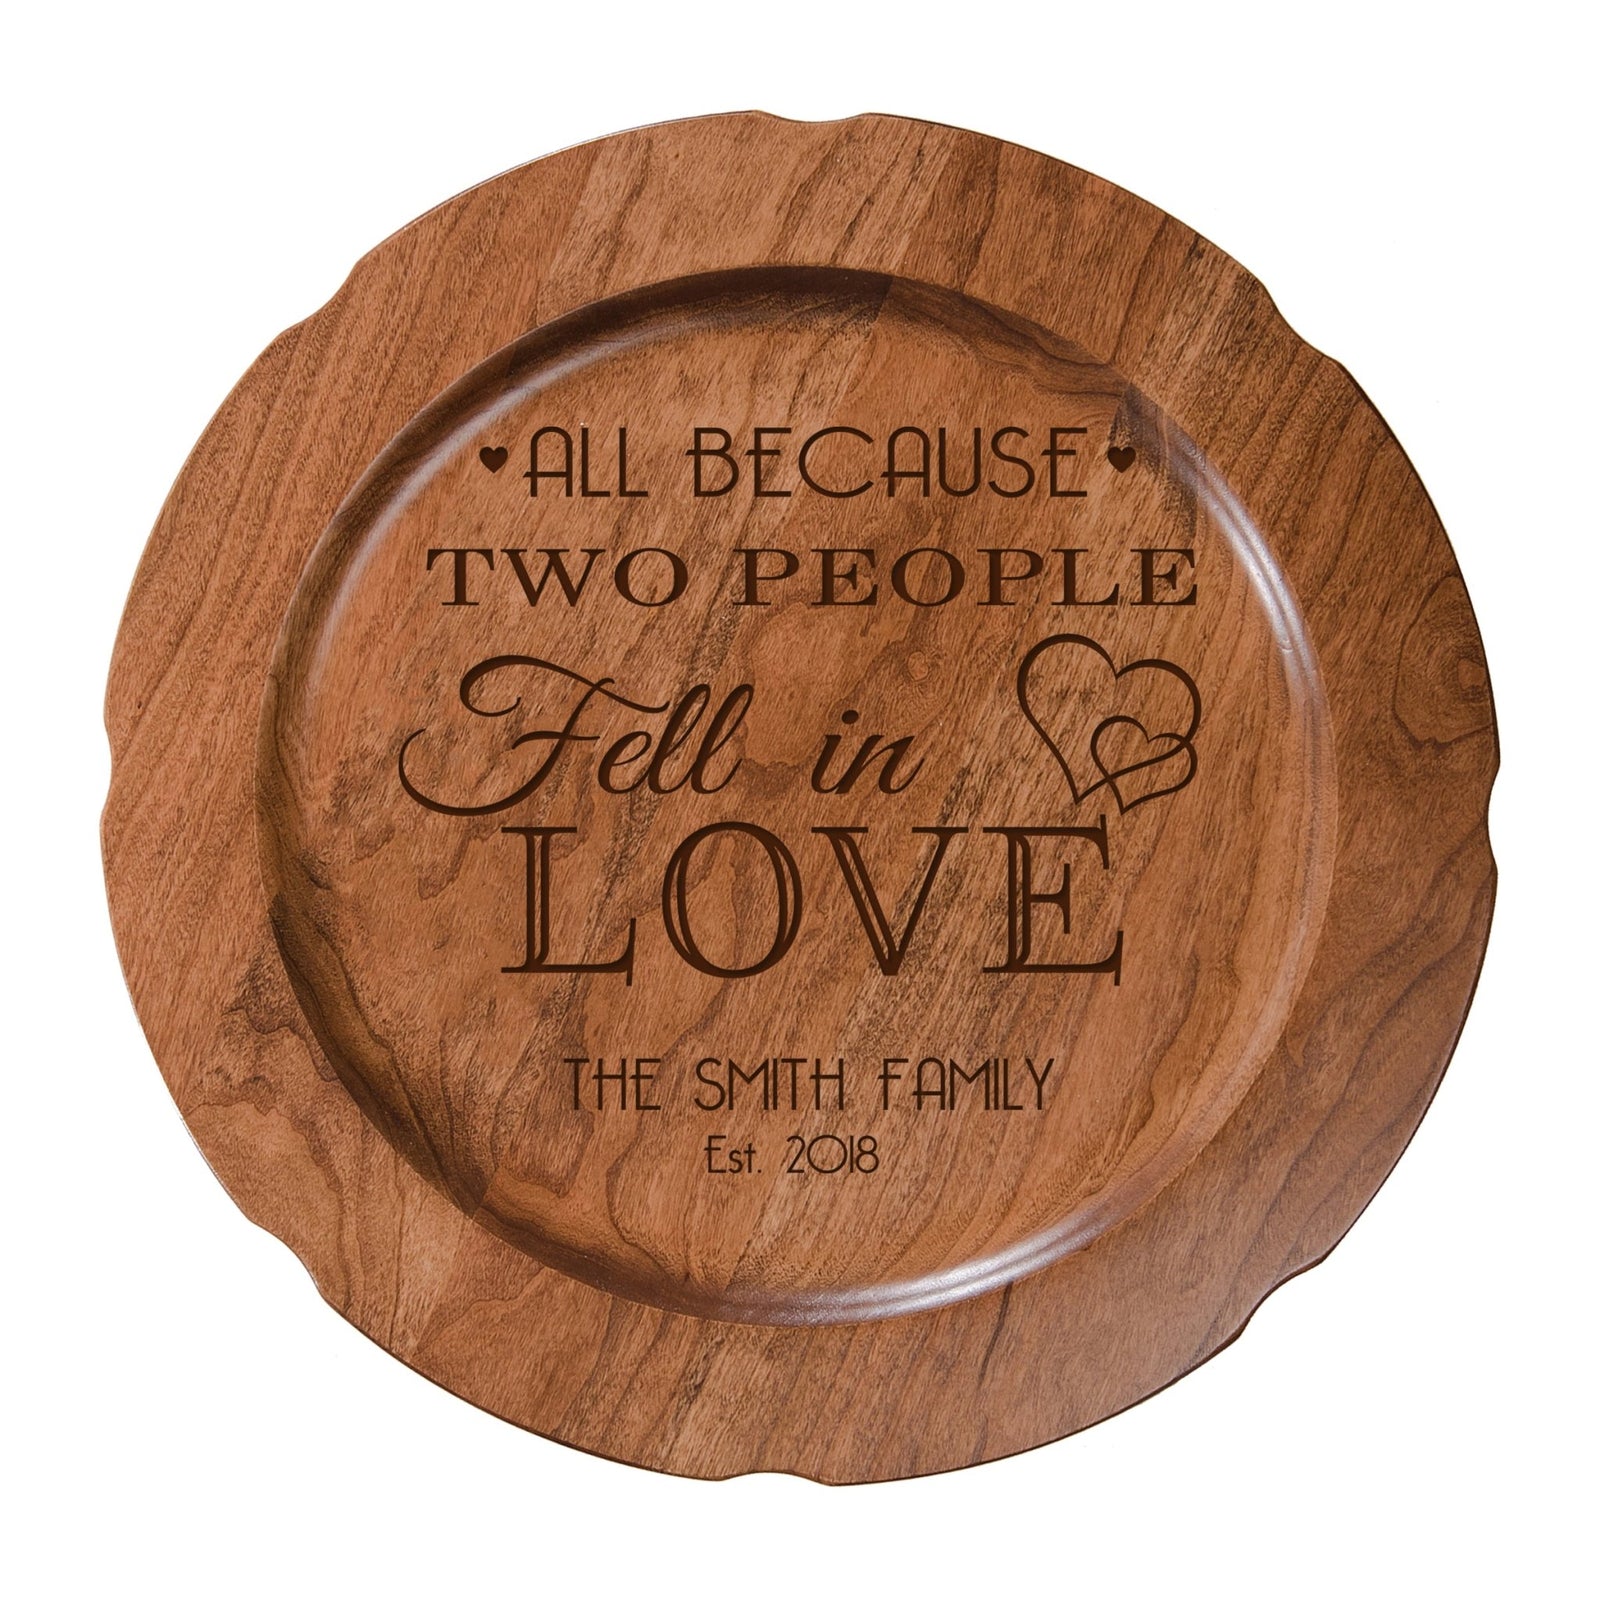 Personalized Inspirational Plates With Quotes - All Because - LifeSong Milestones